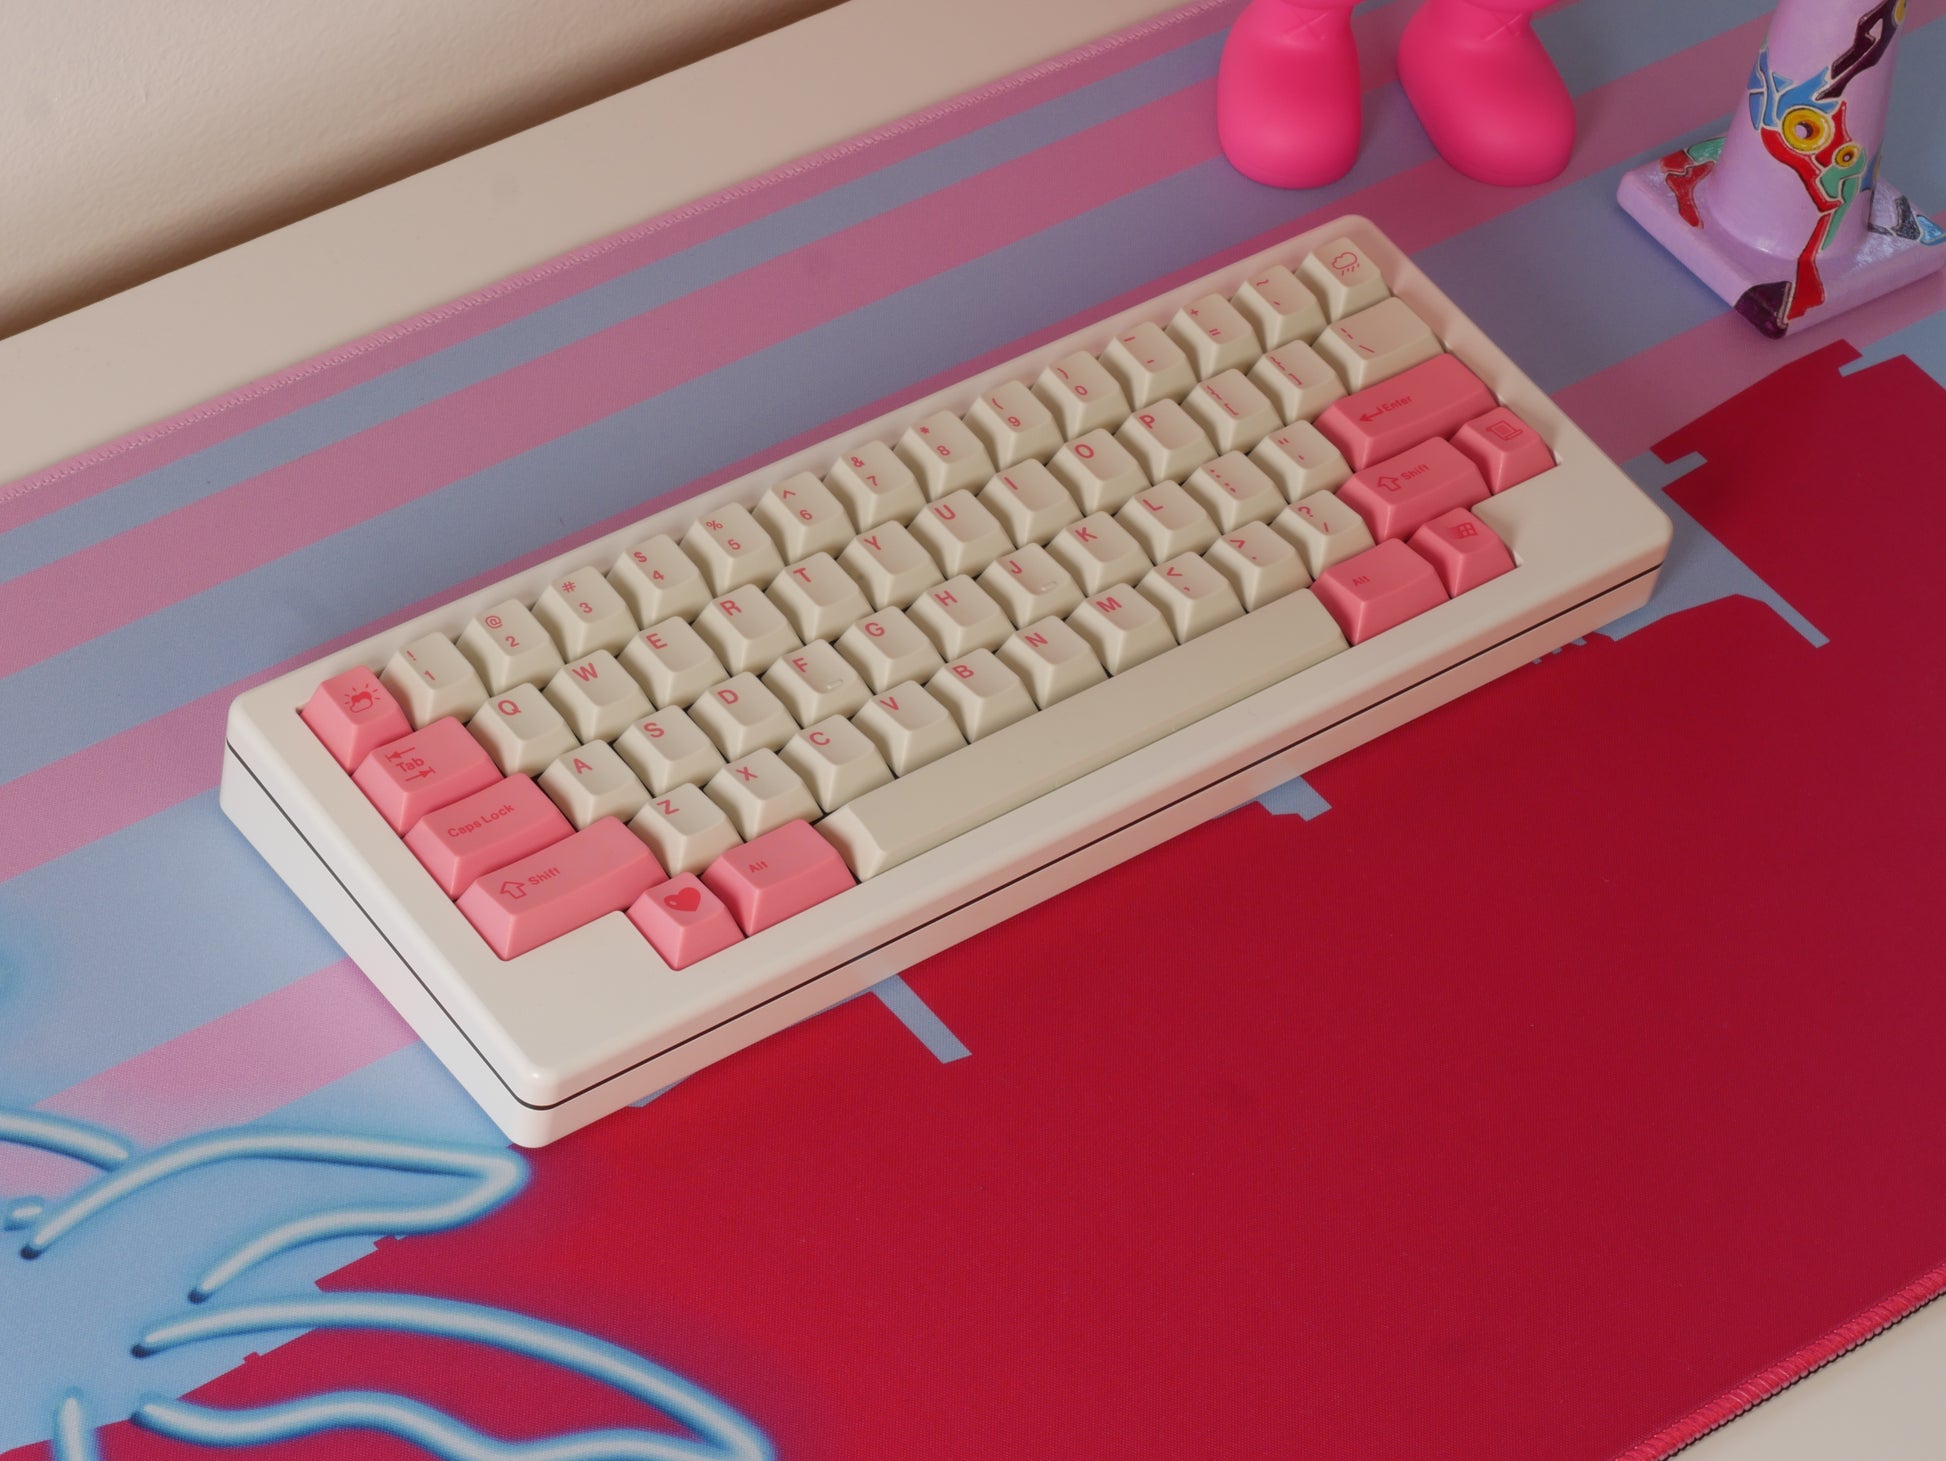 Middle of the pink and blue Miami skyline desk mat. A white keyboard with white and pink keycaps sits on it.